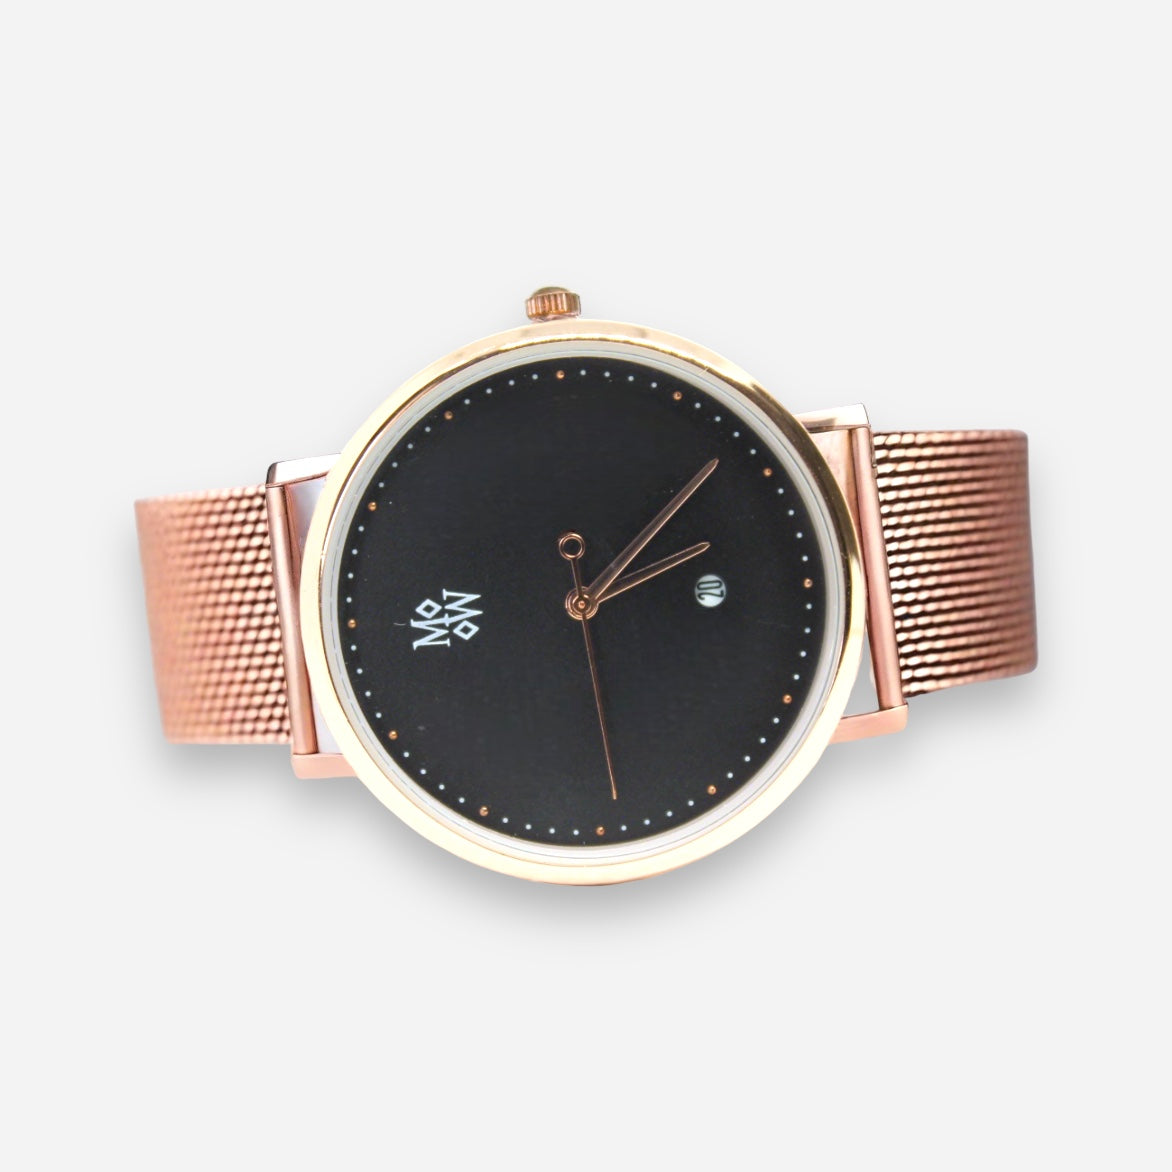 Forte Rose Gold & Black - The Mobilio Watch Company